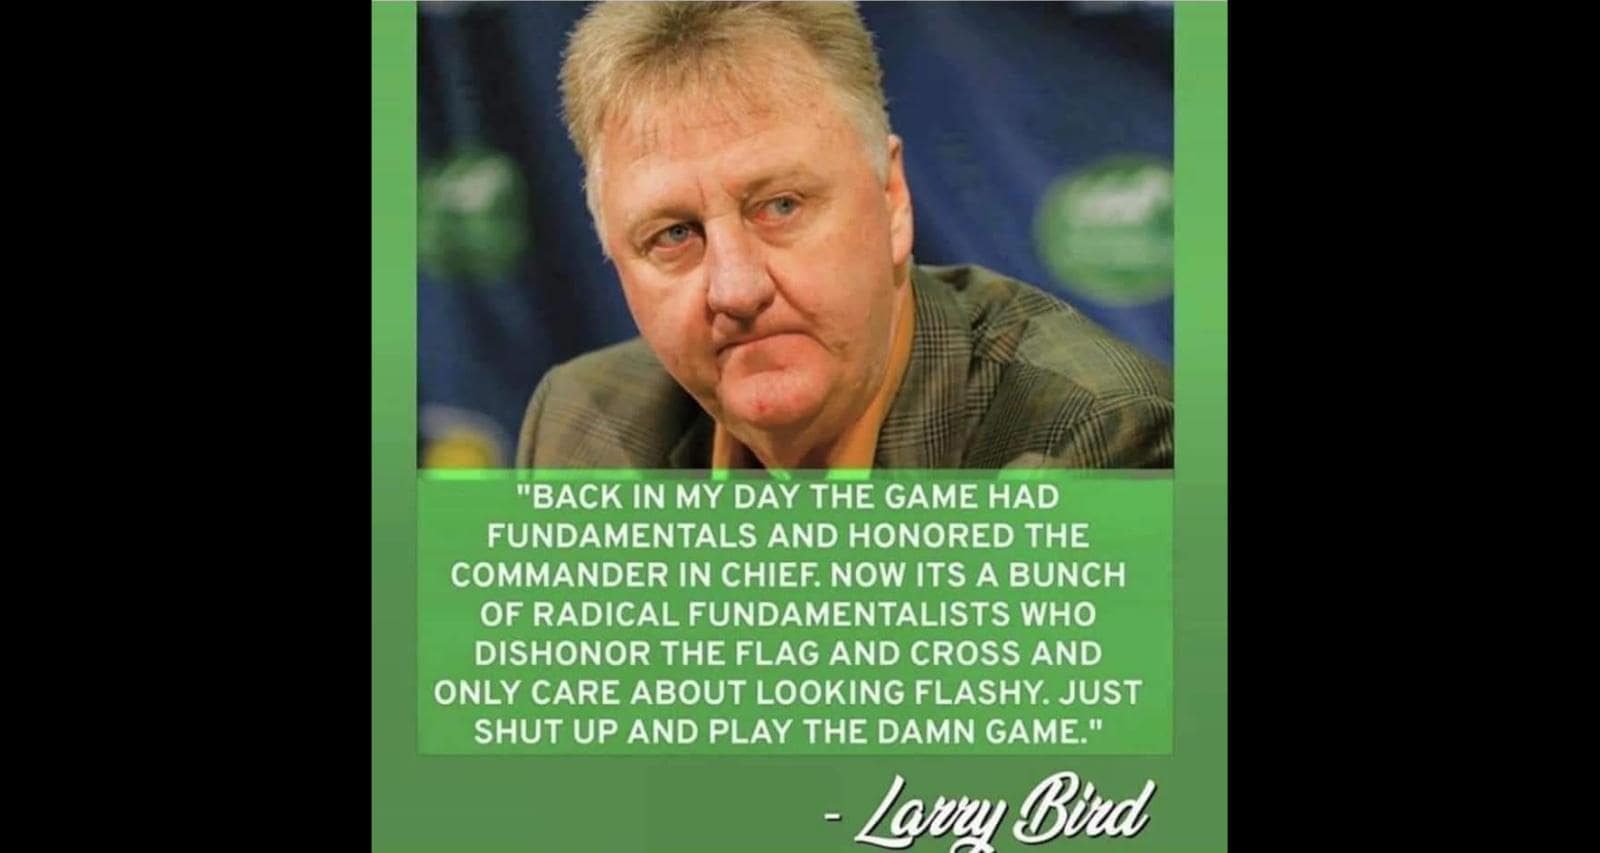 Fact Check Did Larry Bird Make an Anti-NBA Protest Comment